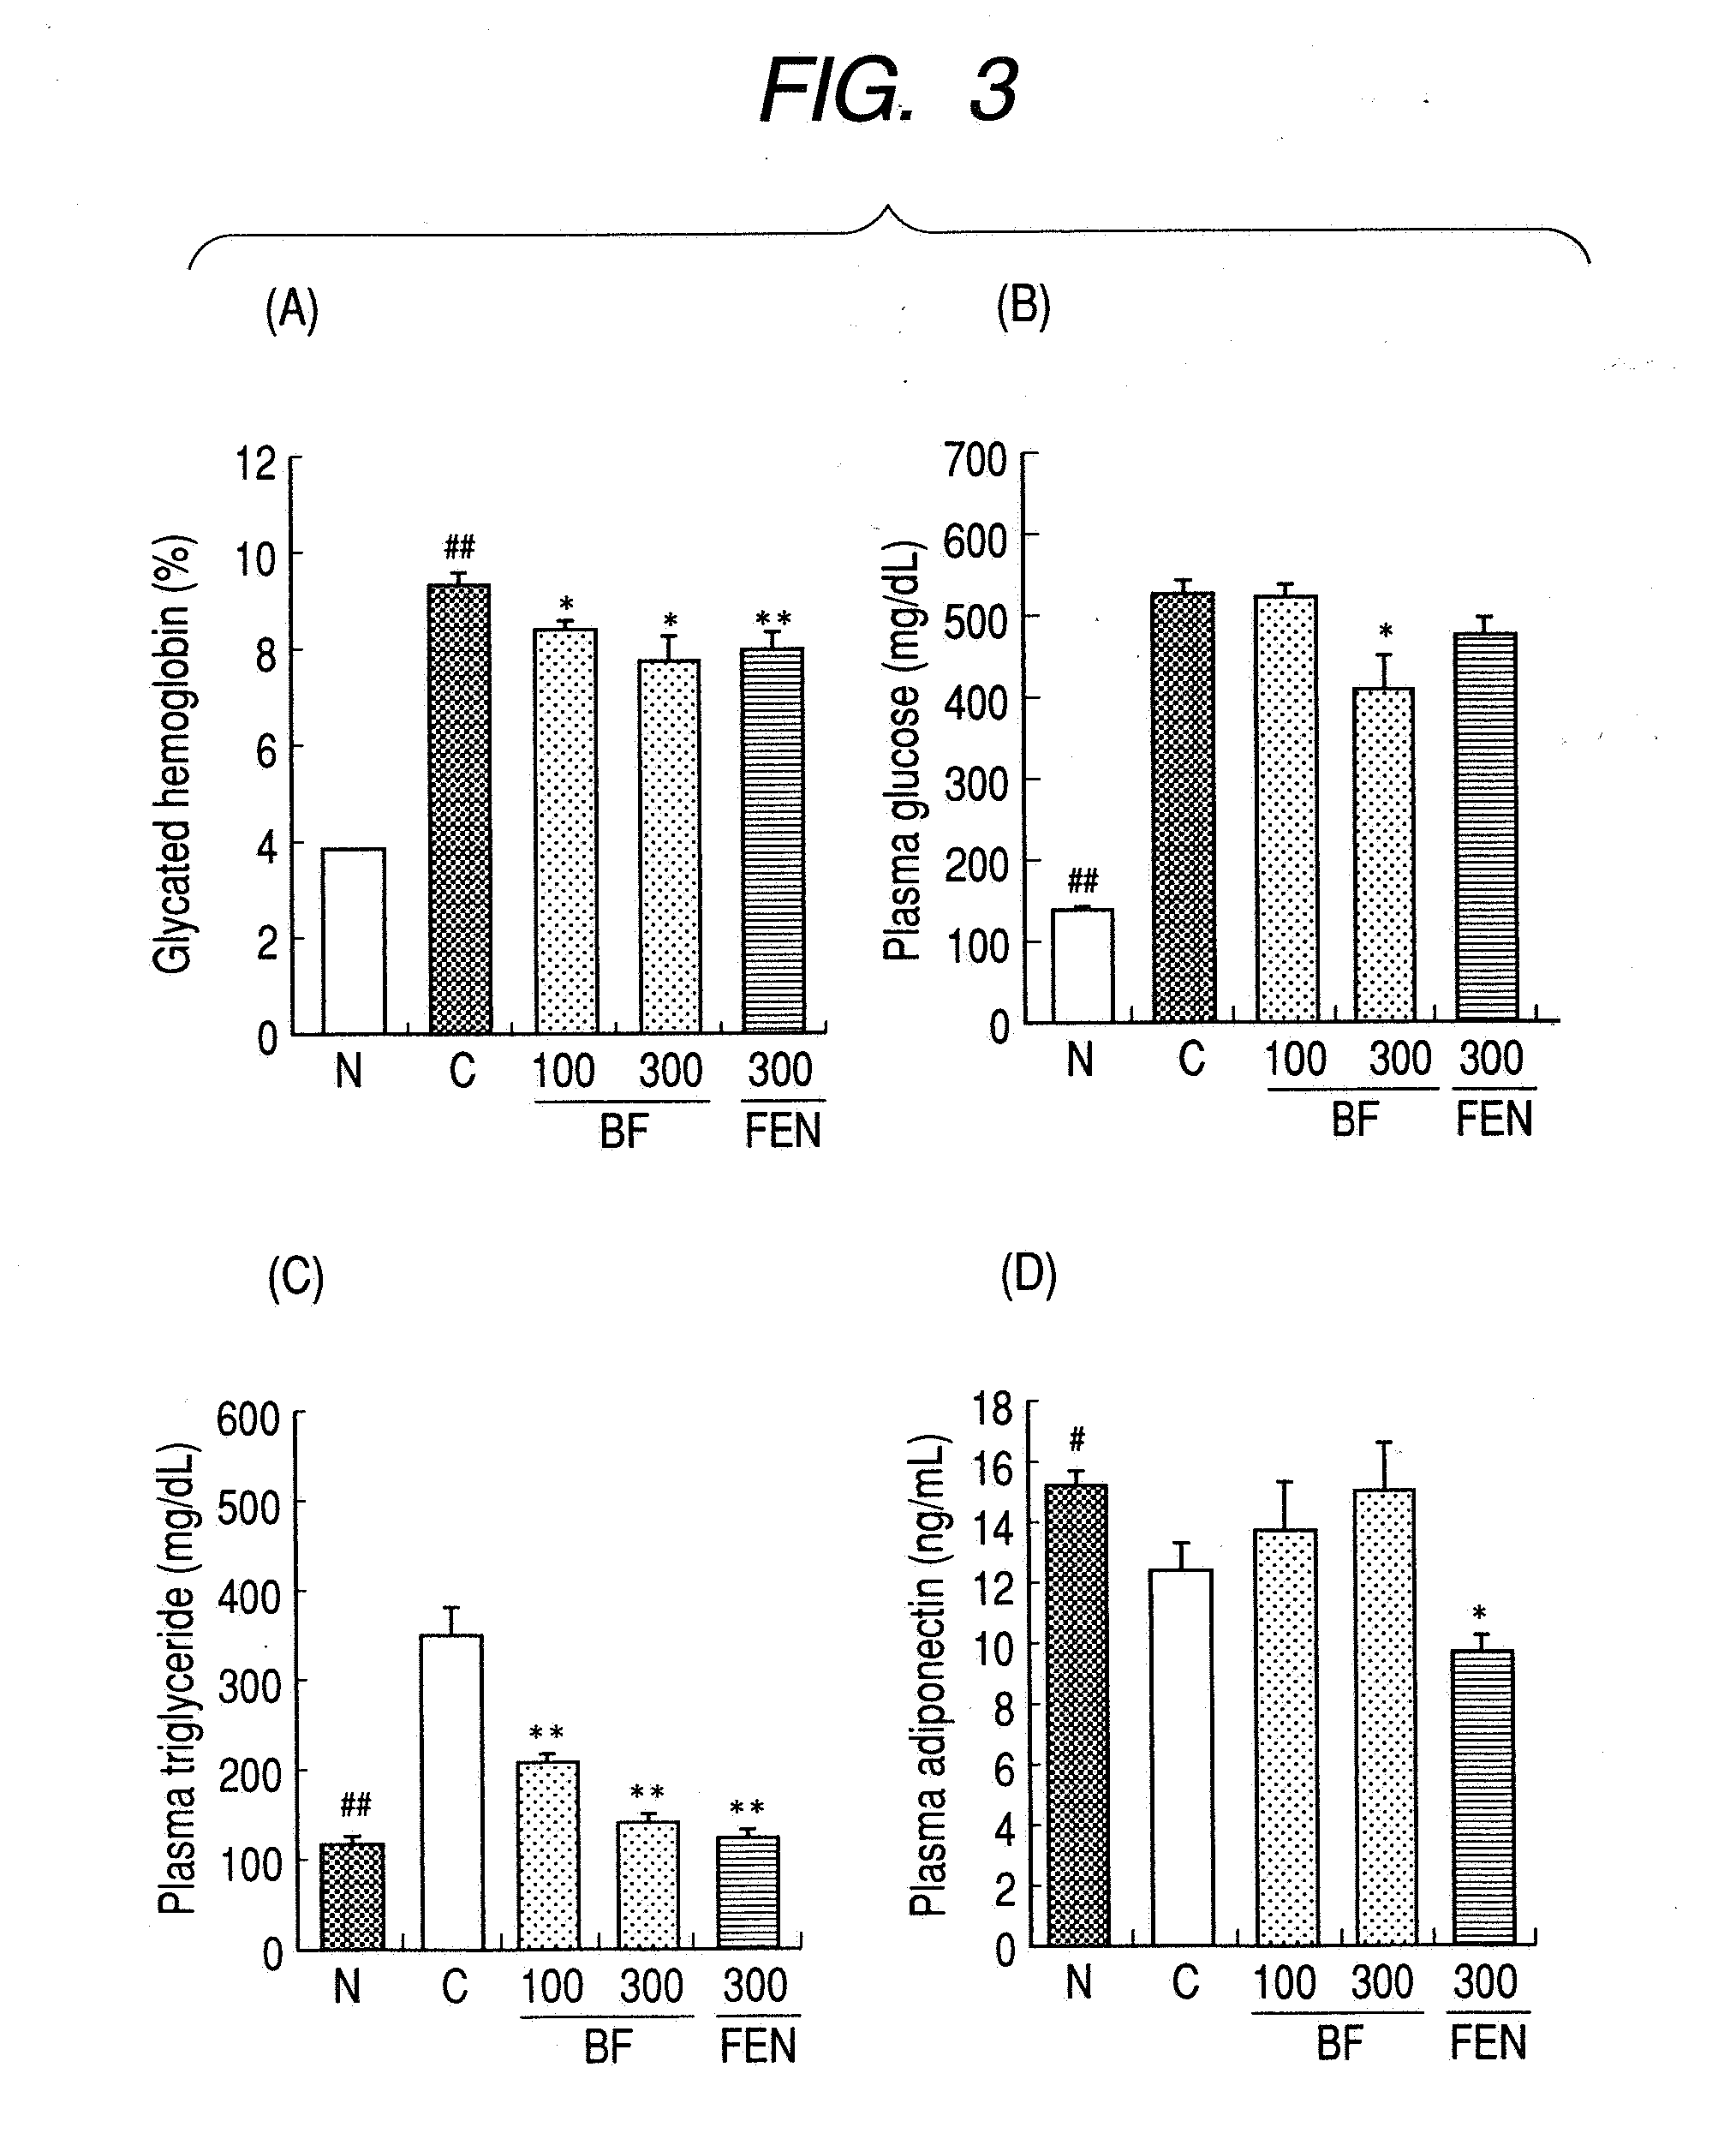 Method for preventing or treating metabolic syndrome